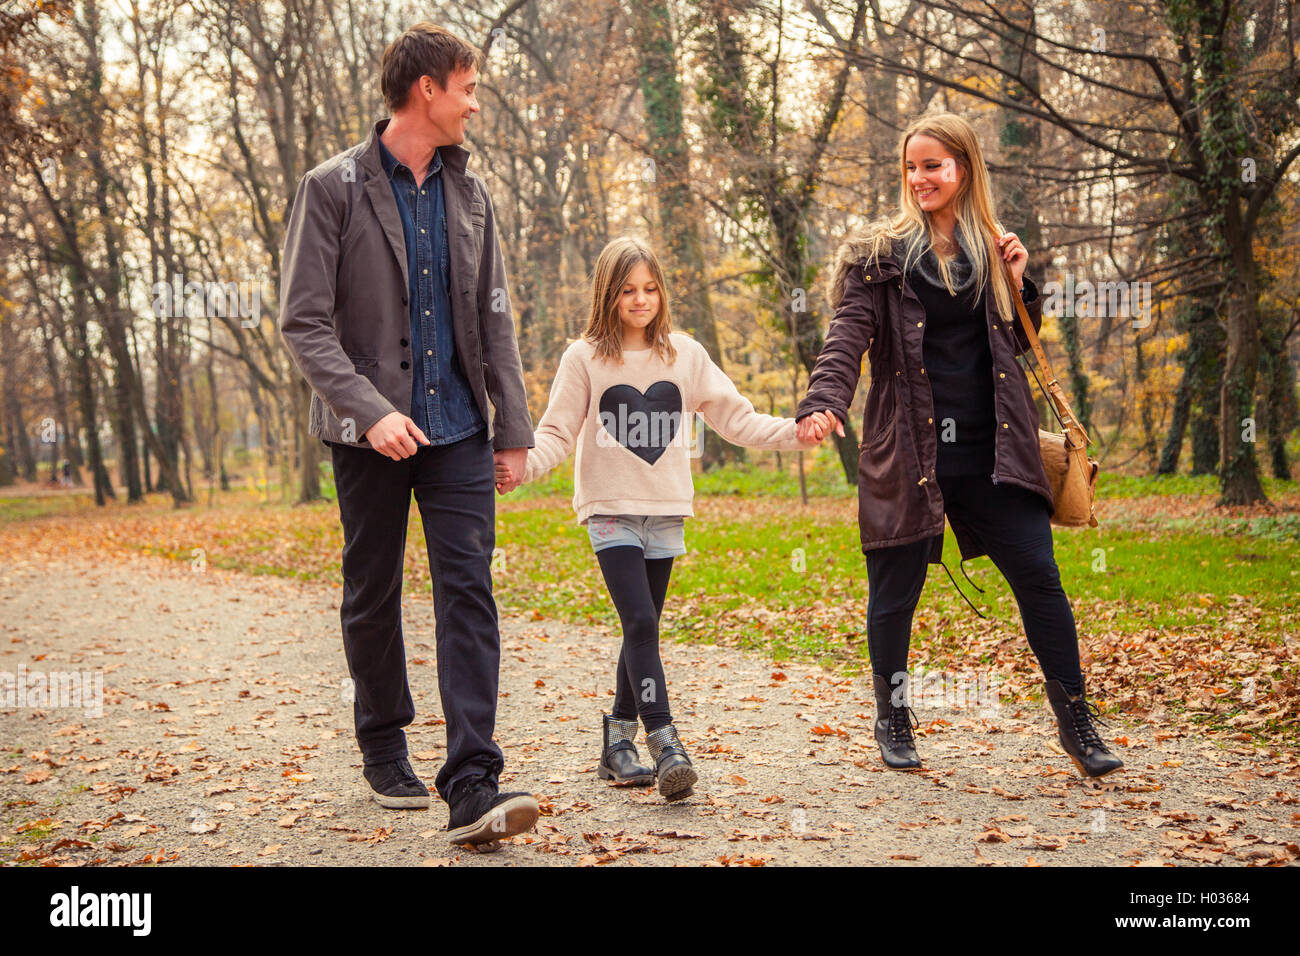 Family of three walk in a park on an autumn day. Stock Photo